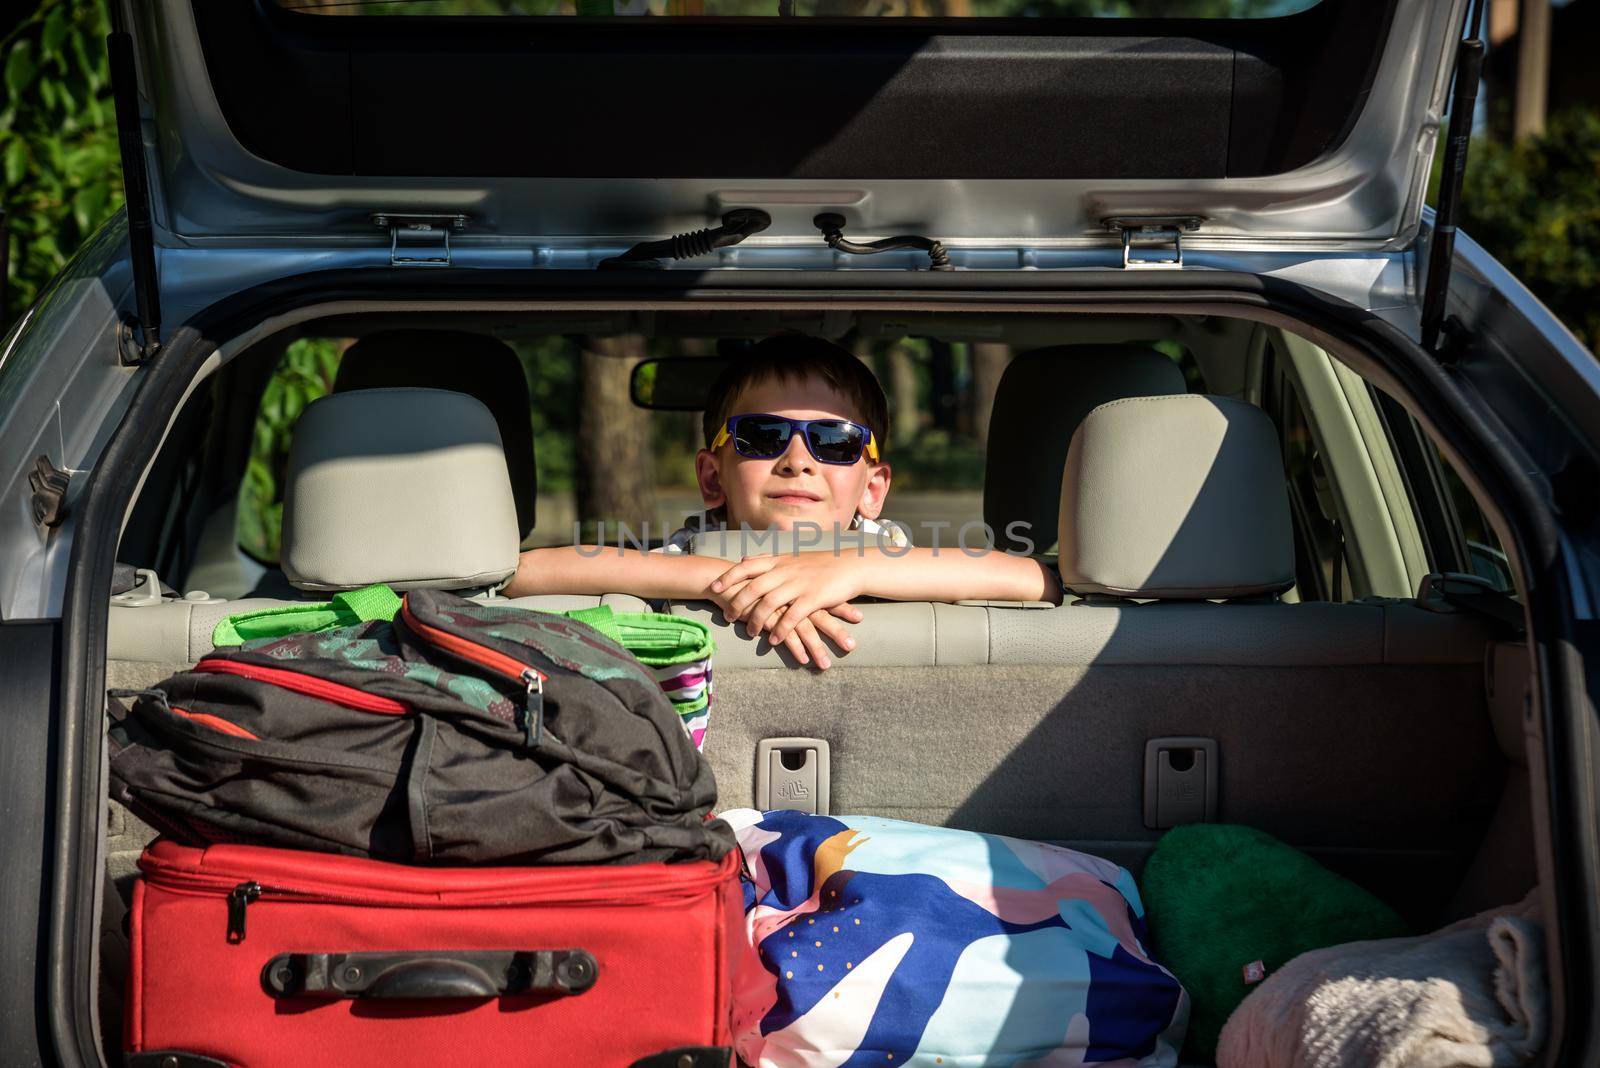 Adorable kid boy wearing sunglasses sitting in car trunk. Portrait of Happy child with open car boot while waiting for parent get ready for vocation. Family trip traveling by car concept.